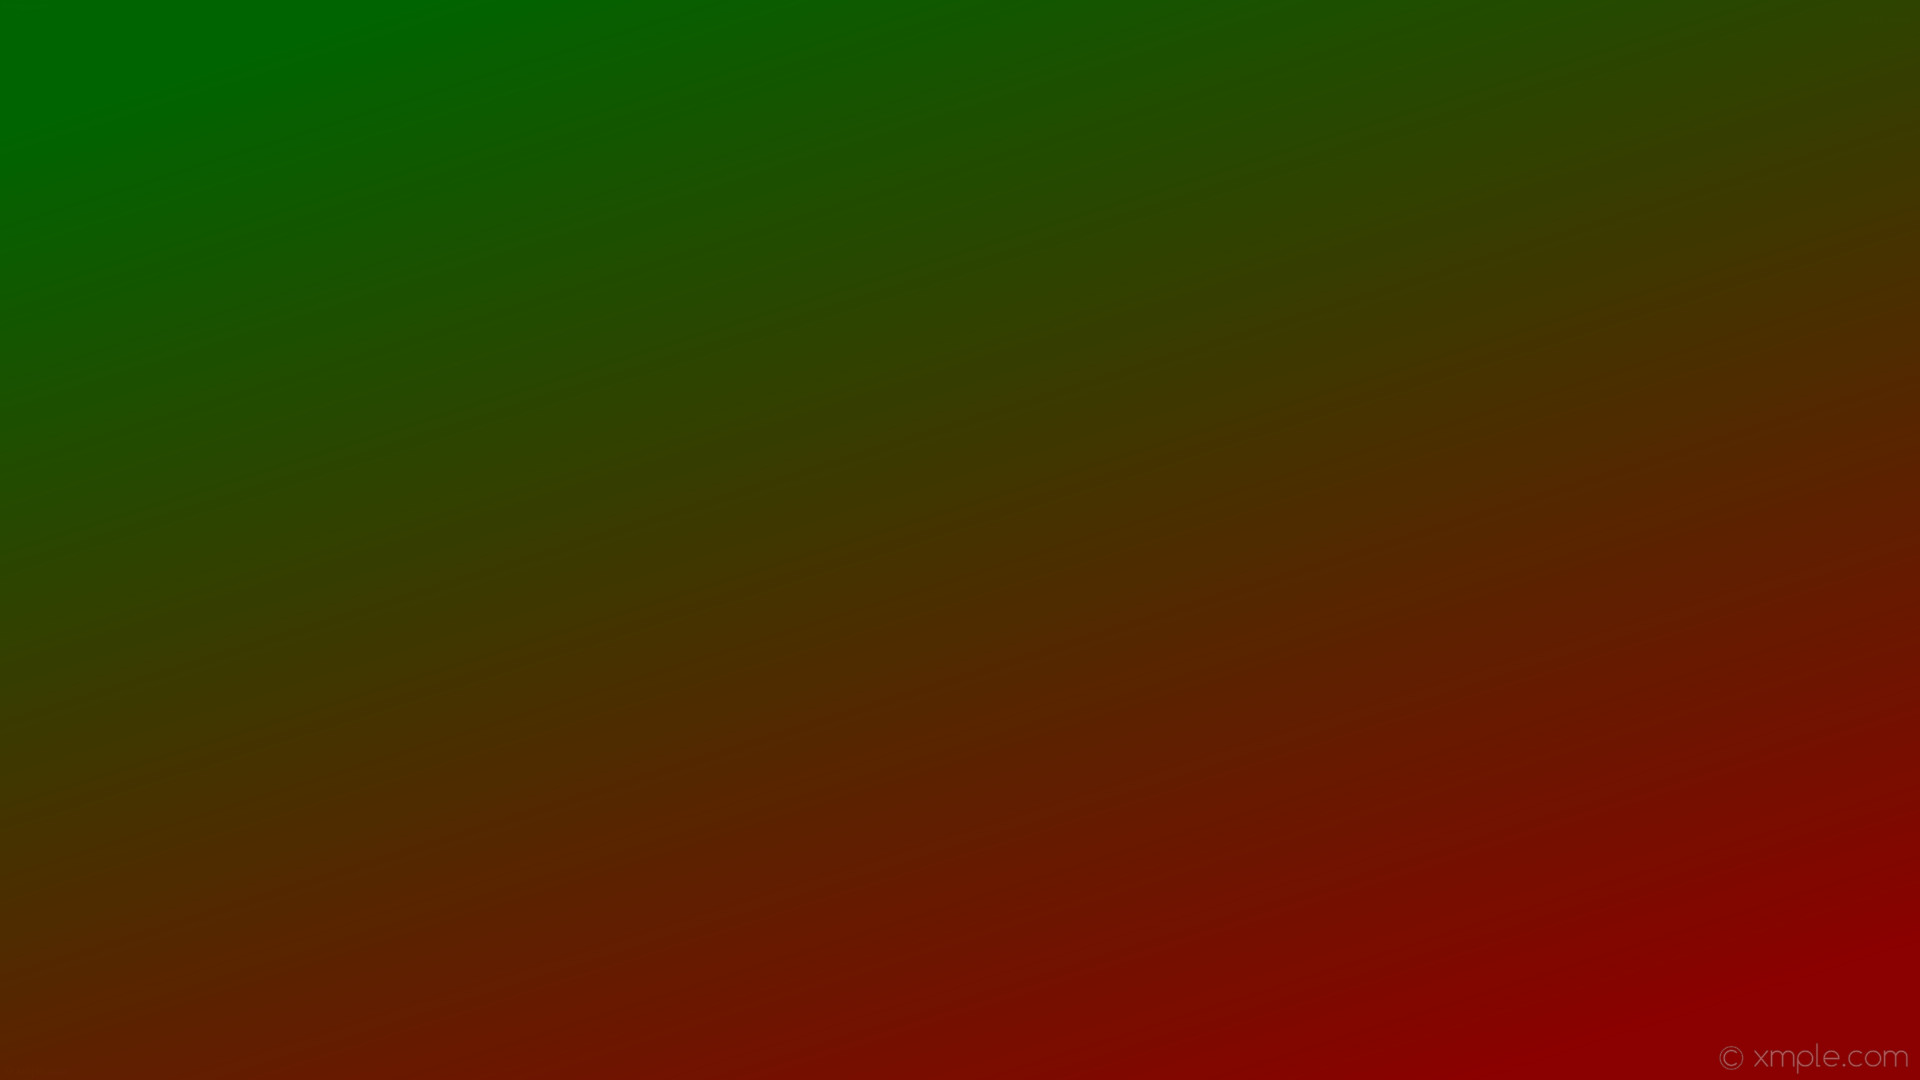 green and red gradient background